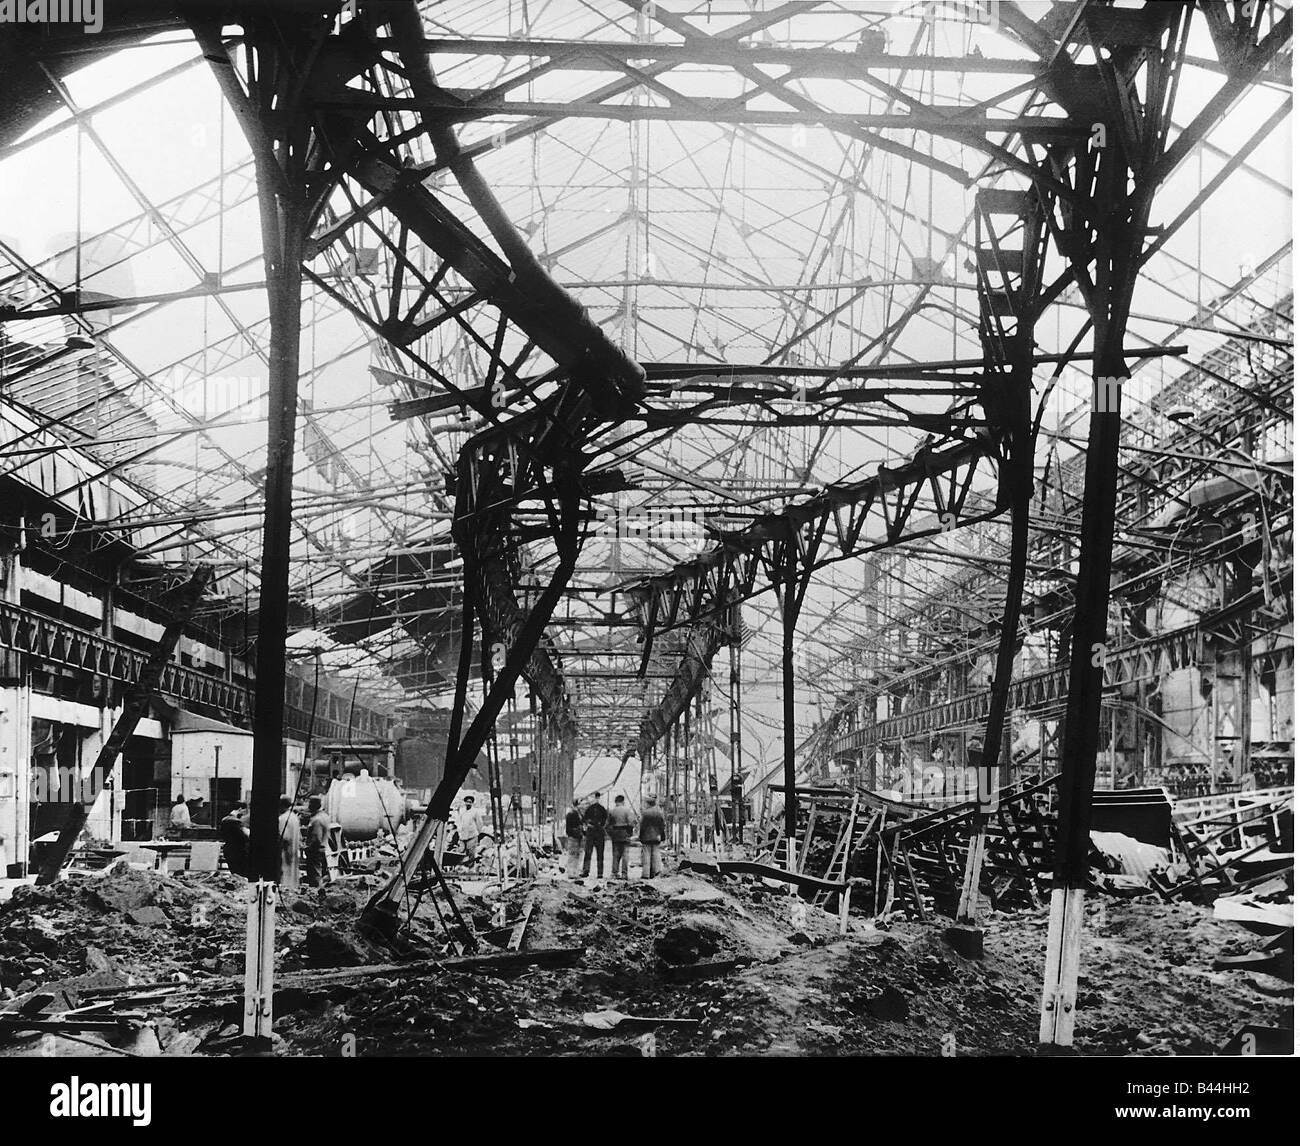 The Renault car factory in France after being hit by a bomb dropped by the US 8th Air Force during WW2 Stock Photo